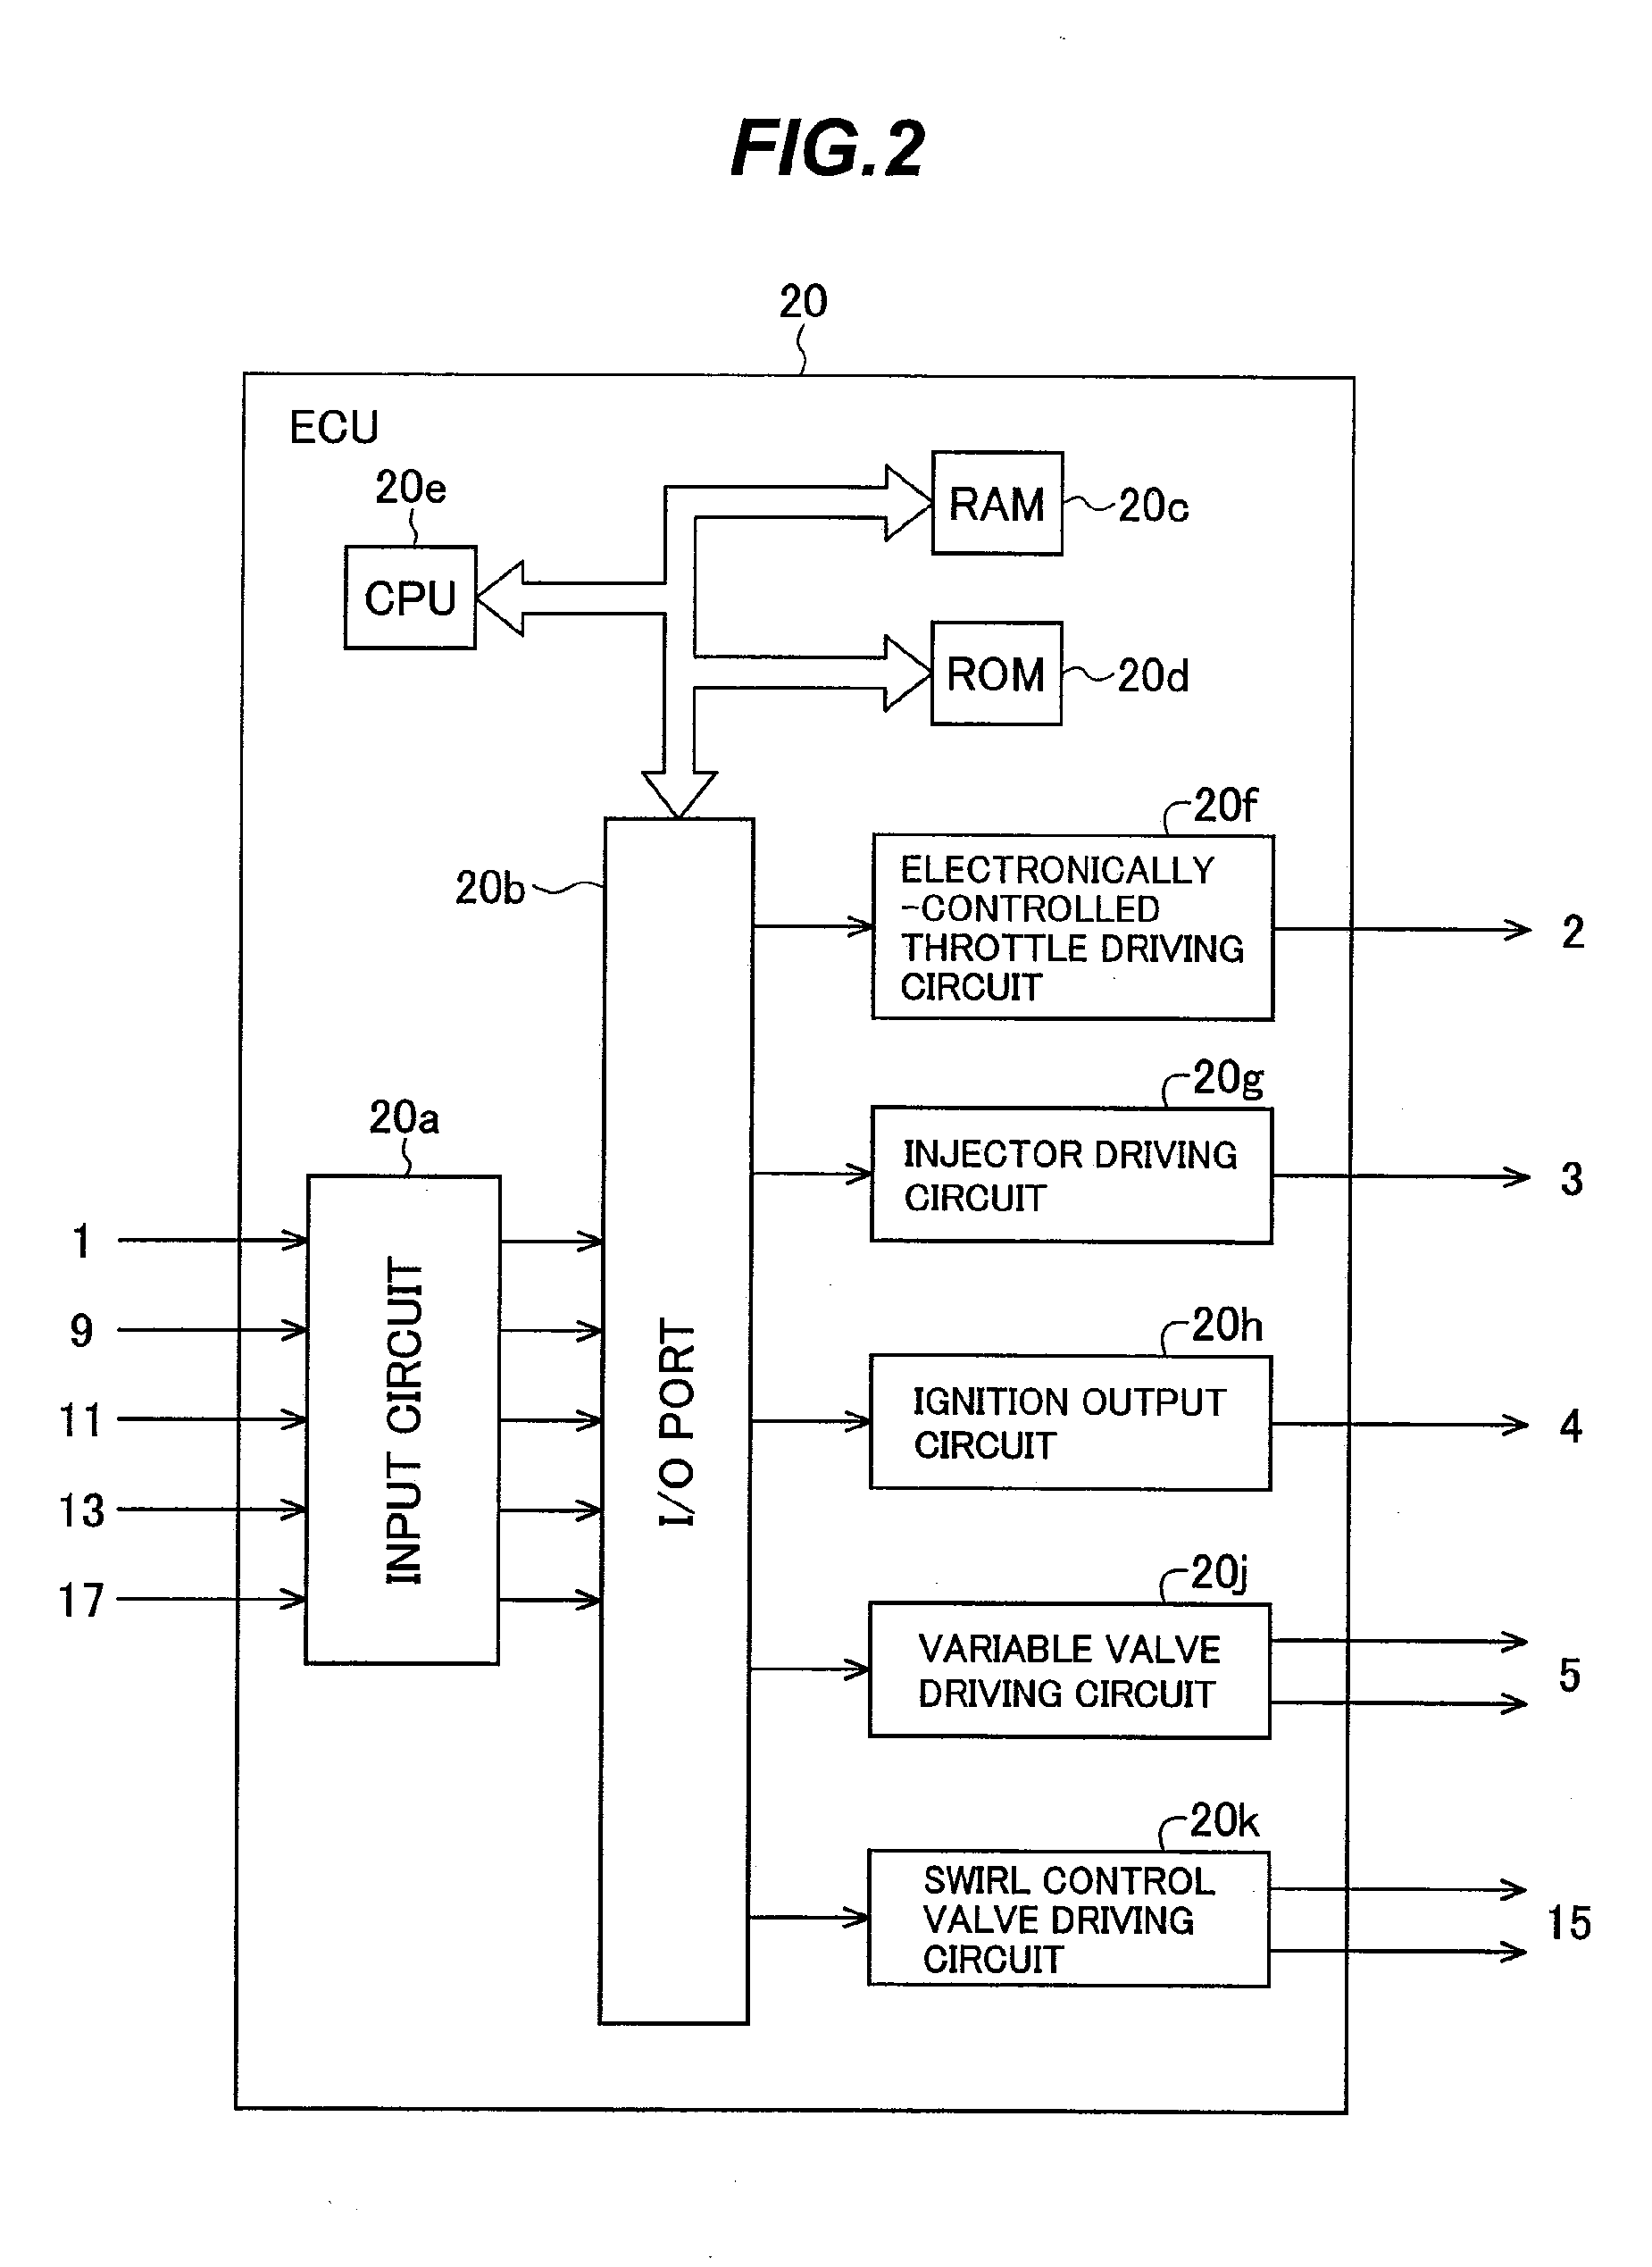 Apparatus and method for Controlling a Homogeneous Charge Compression-Ignited Internal-Combustion Engine